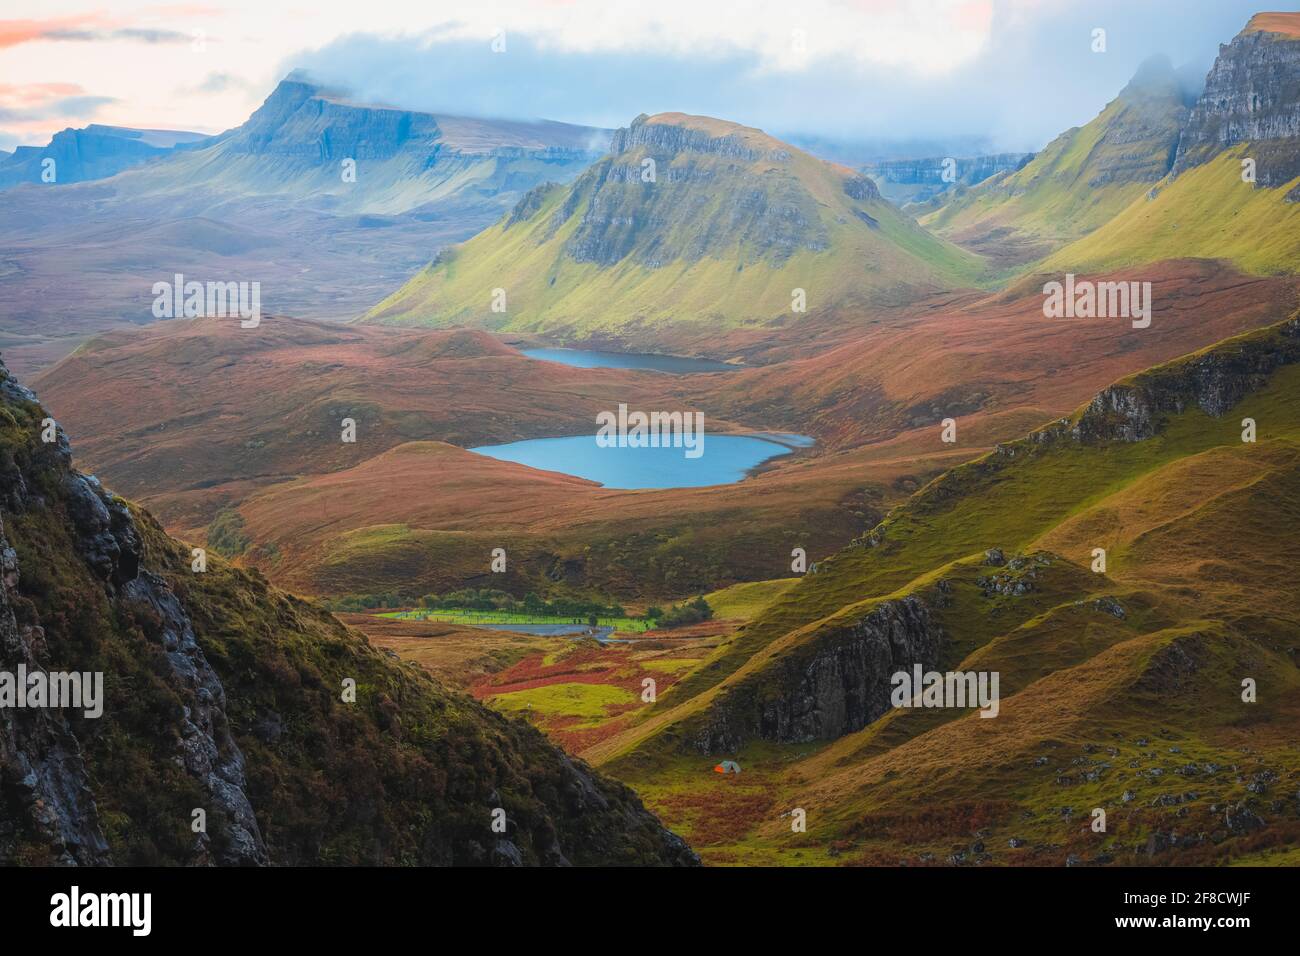 Epic mountain landscape view of the rugged, contoured terrain of the otherworldly Cleat at the Quiraing on the Isle of Skye, Scotland. Stock Photo